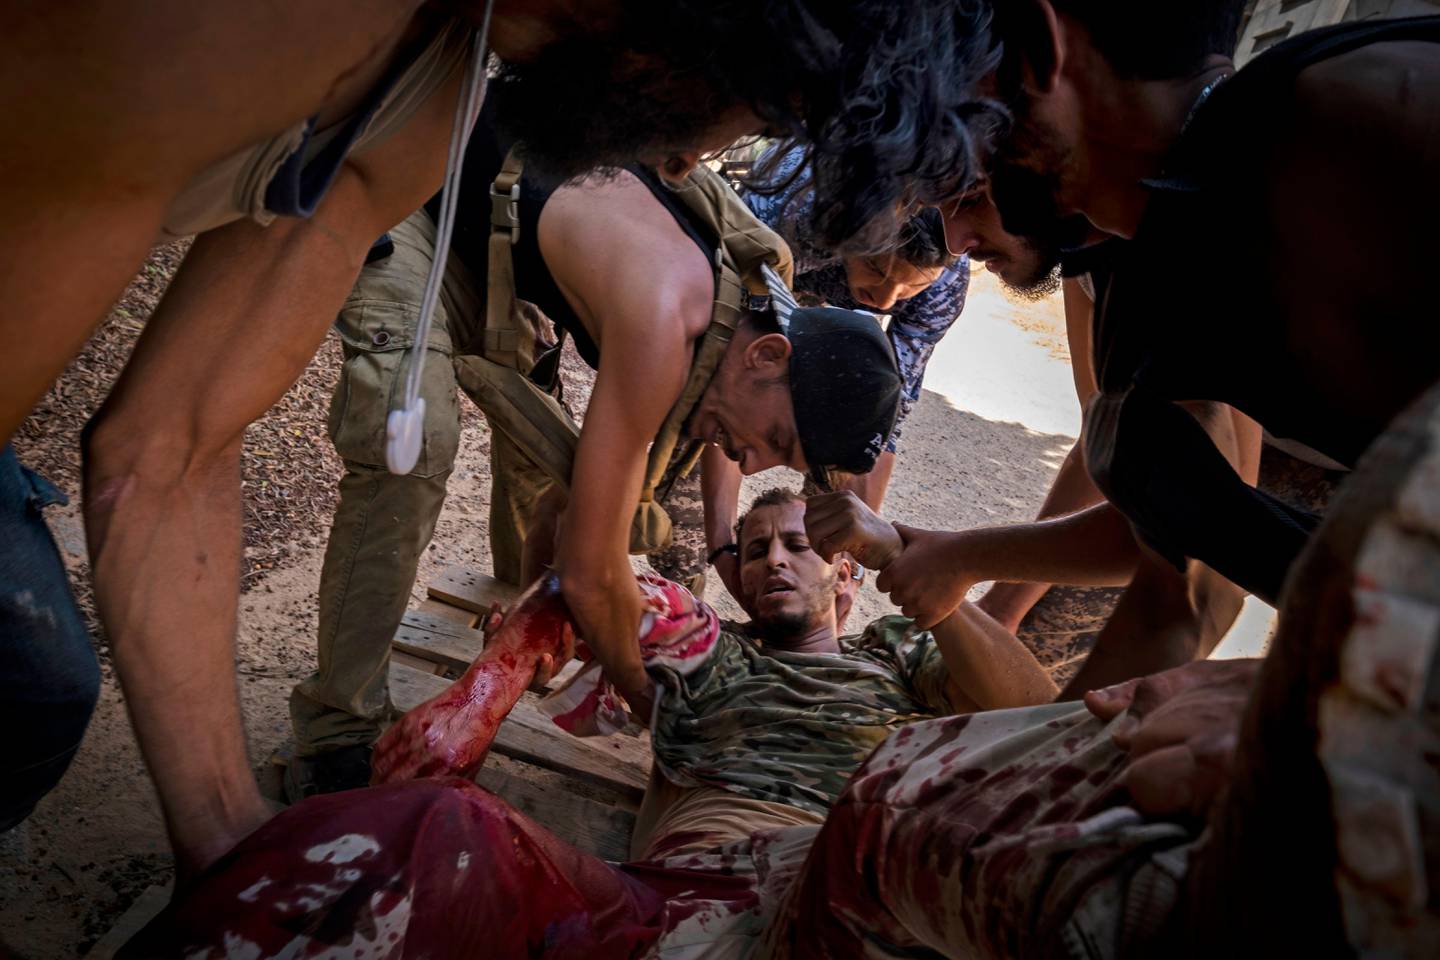 FILE - In this Sept. 7, 2019 file, photo, a mortally wounded fighter of the 'Shelba' unit, allied with the U.N-supported Libyan government, is moved by comrades after being shot at the Salah-addin neighborhood front line, in Tripoli, Libya. Officials in Libyas U.N.-backed administration say they plan to present evidence to Moscow of Russian mercenaries fighting alongside their adversary in their countrys war. Libyan officials say up to 800 fighters from the Russian private security contractor Wagner Group have joined the forces of Hifter, the commander of forces battling for months trying to capture Libyas capital, Tripoli.  (AP Photo/Ricard Garcia Vilanova, File)